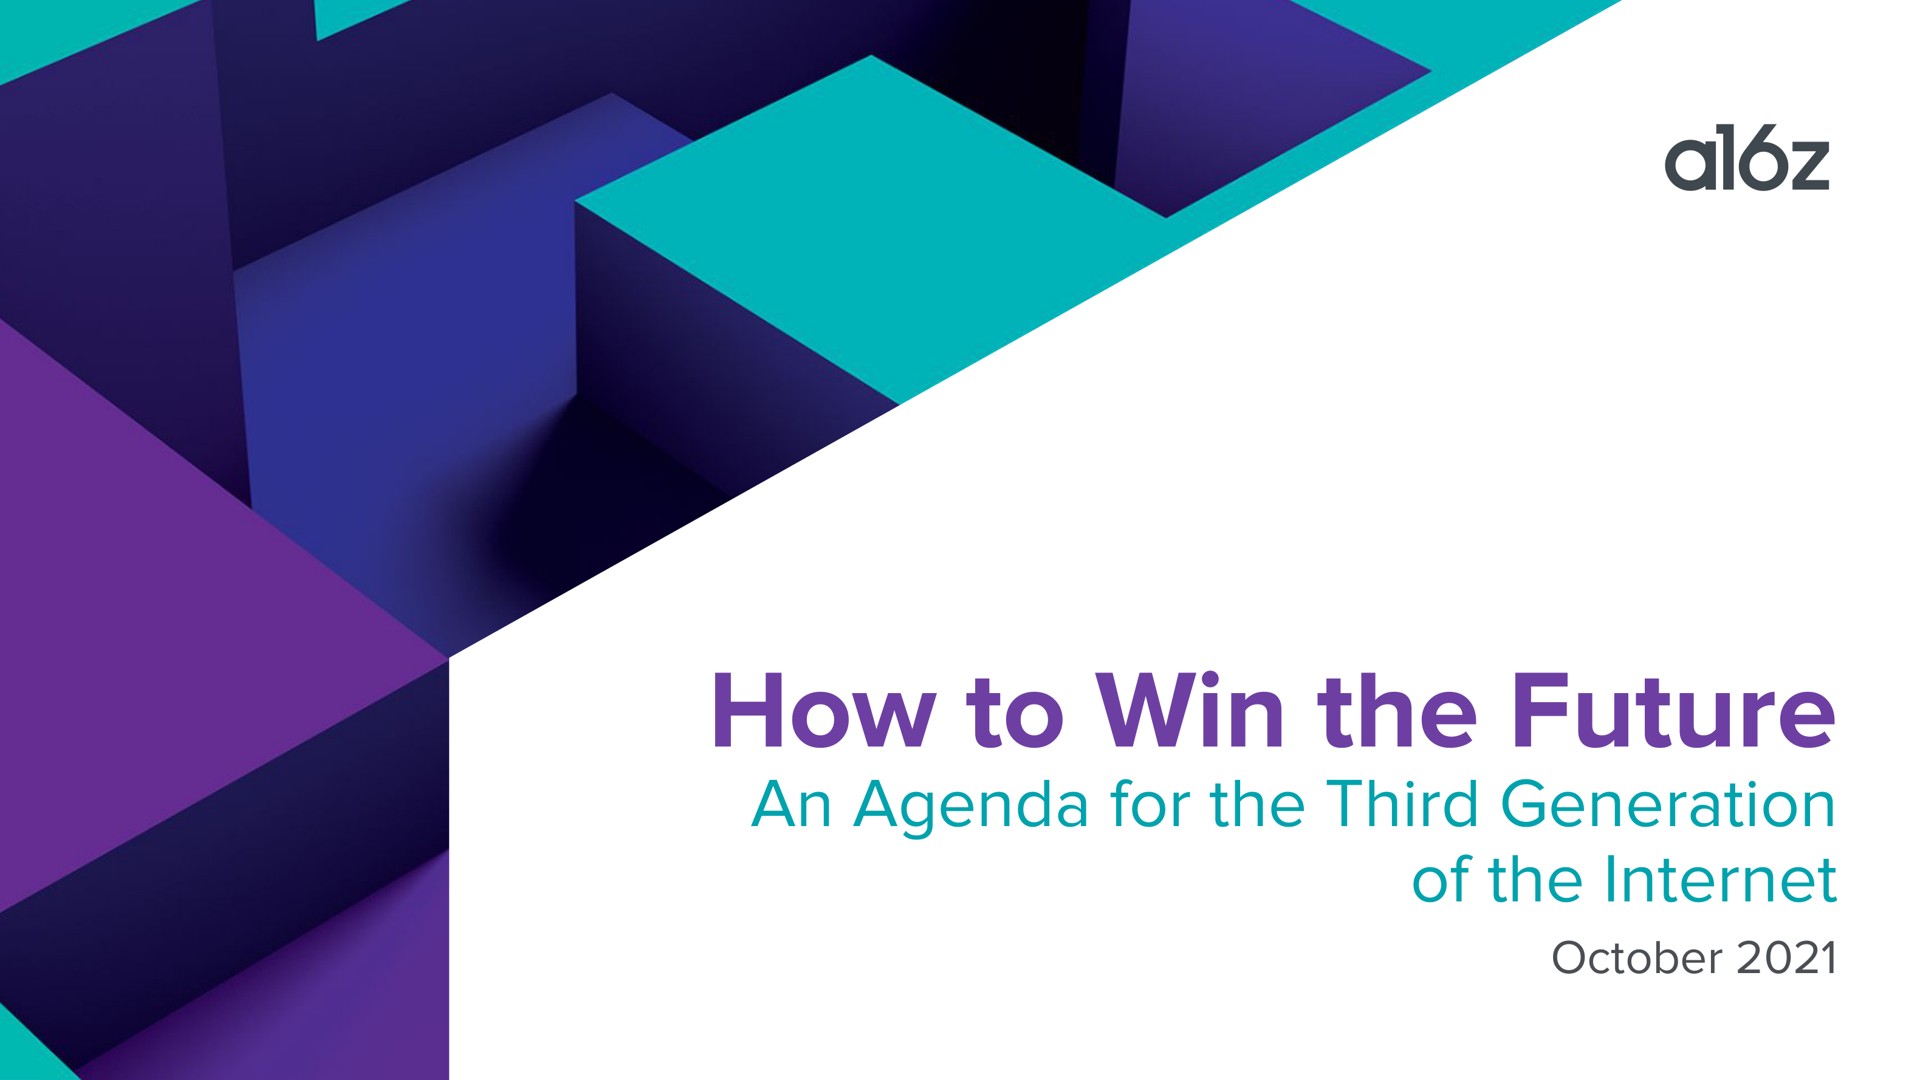 how to win the future an agenda for the third generation of the | a16z